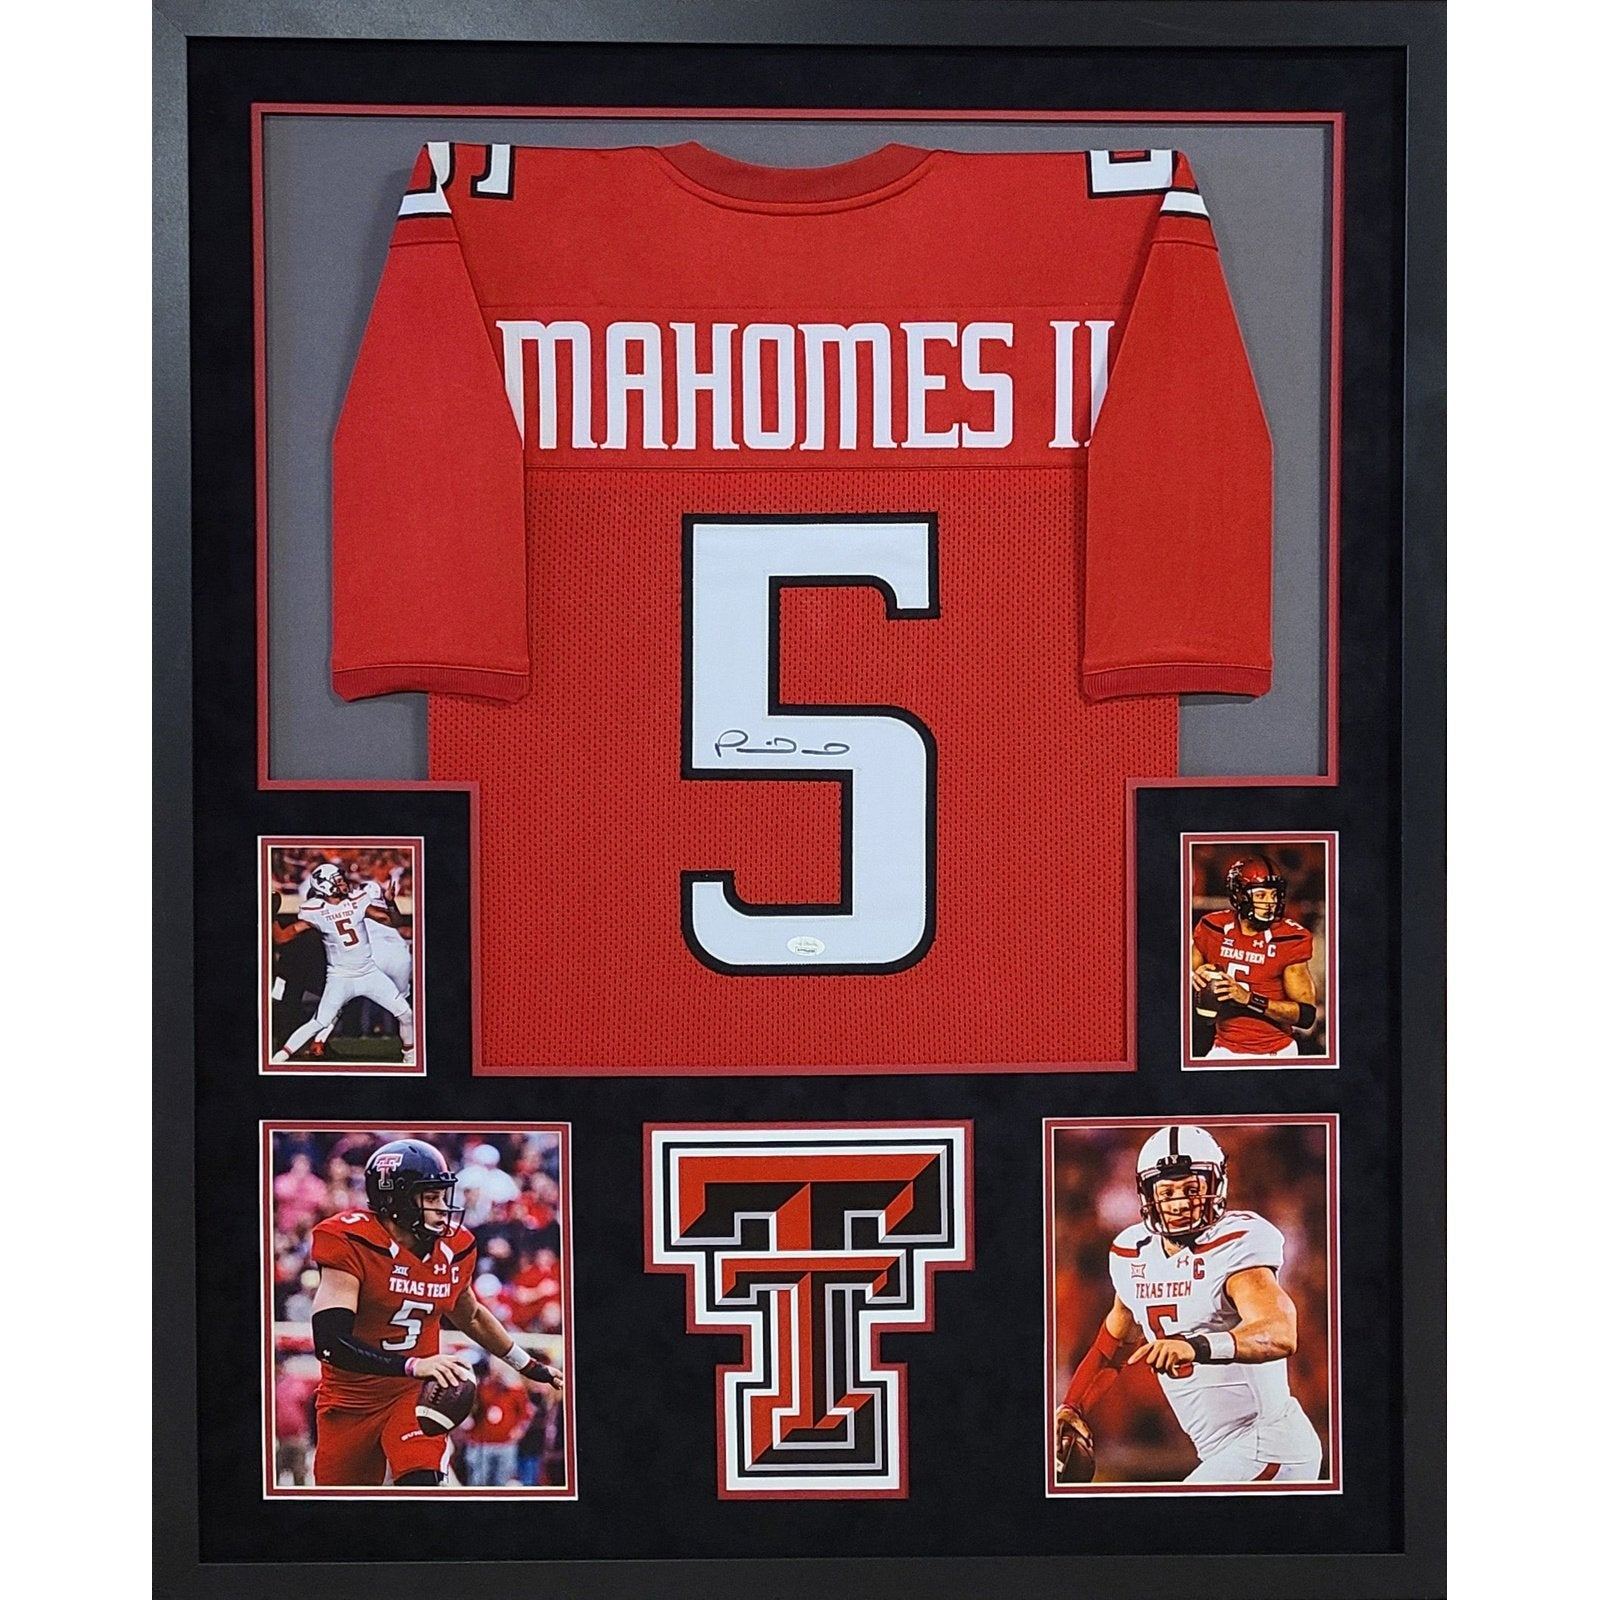 Patrick Mahomes Framed Texas Tech Red Jersey JSA Autographed Signed